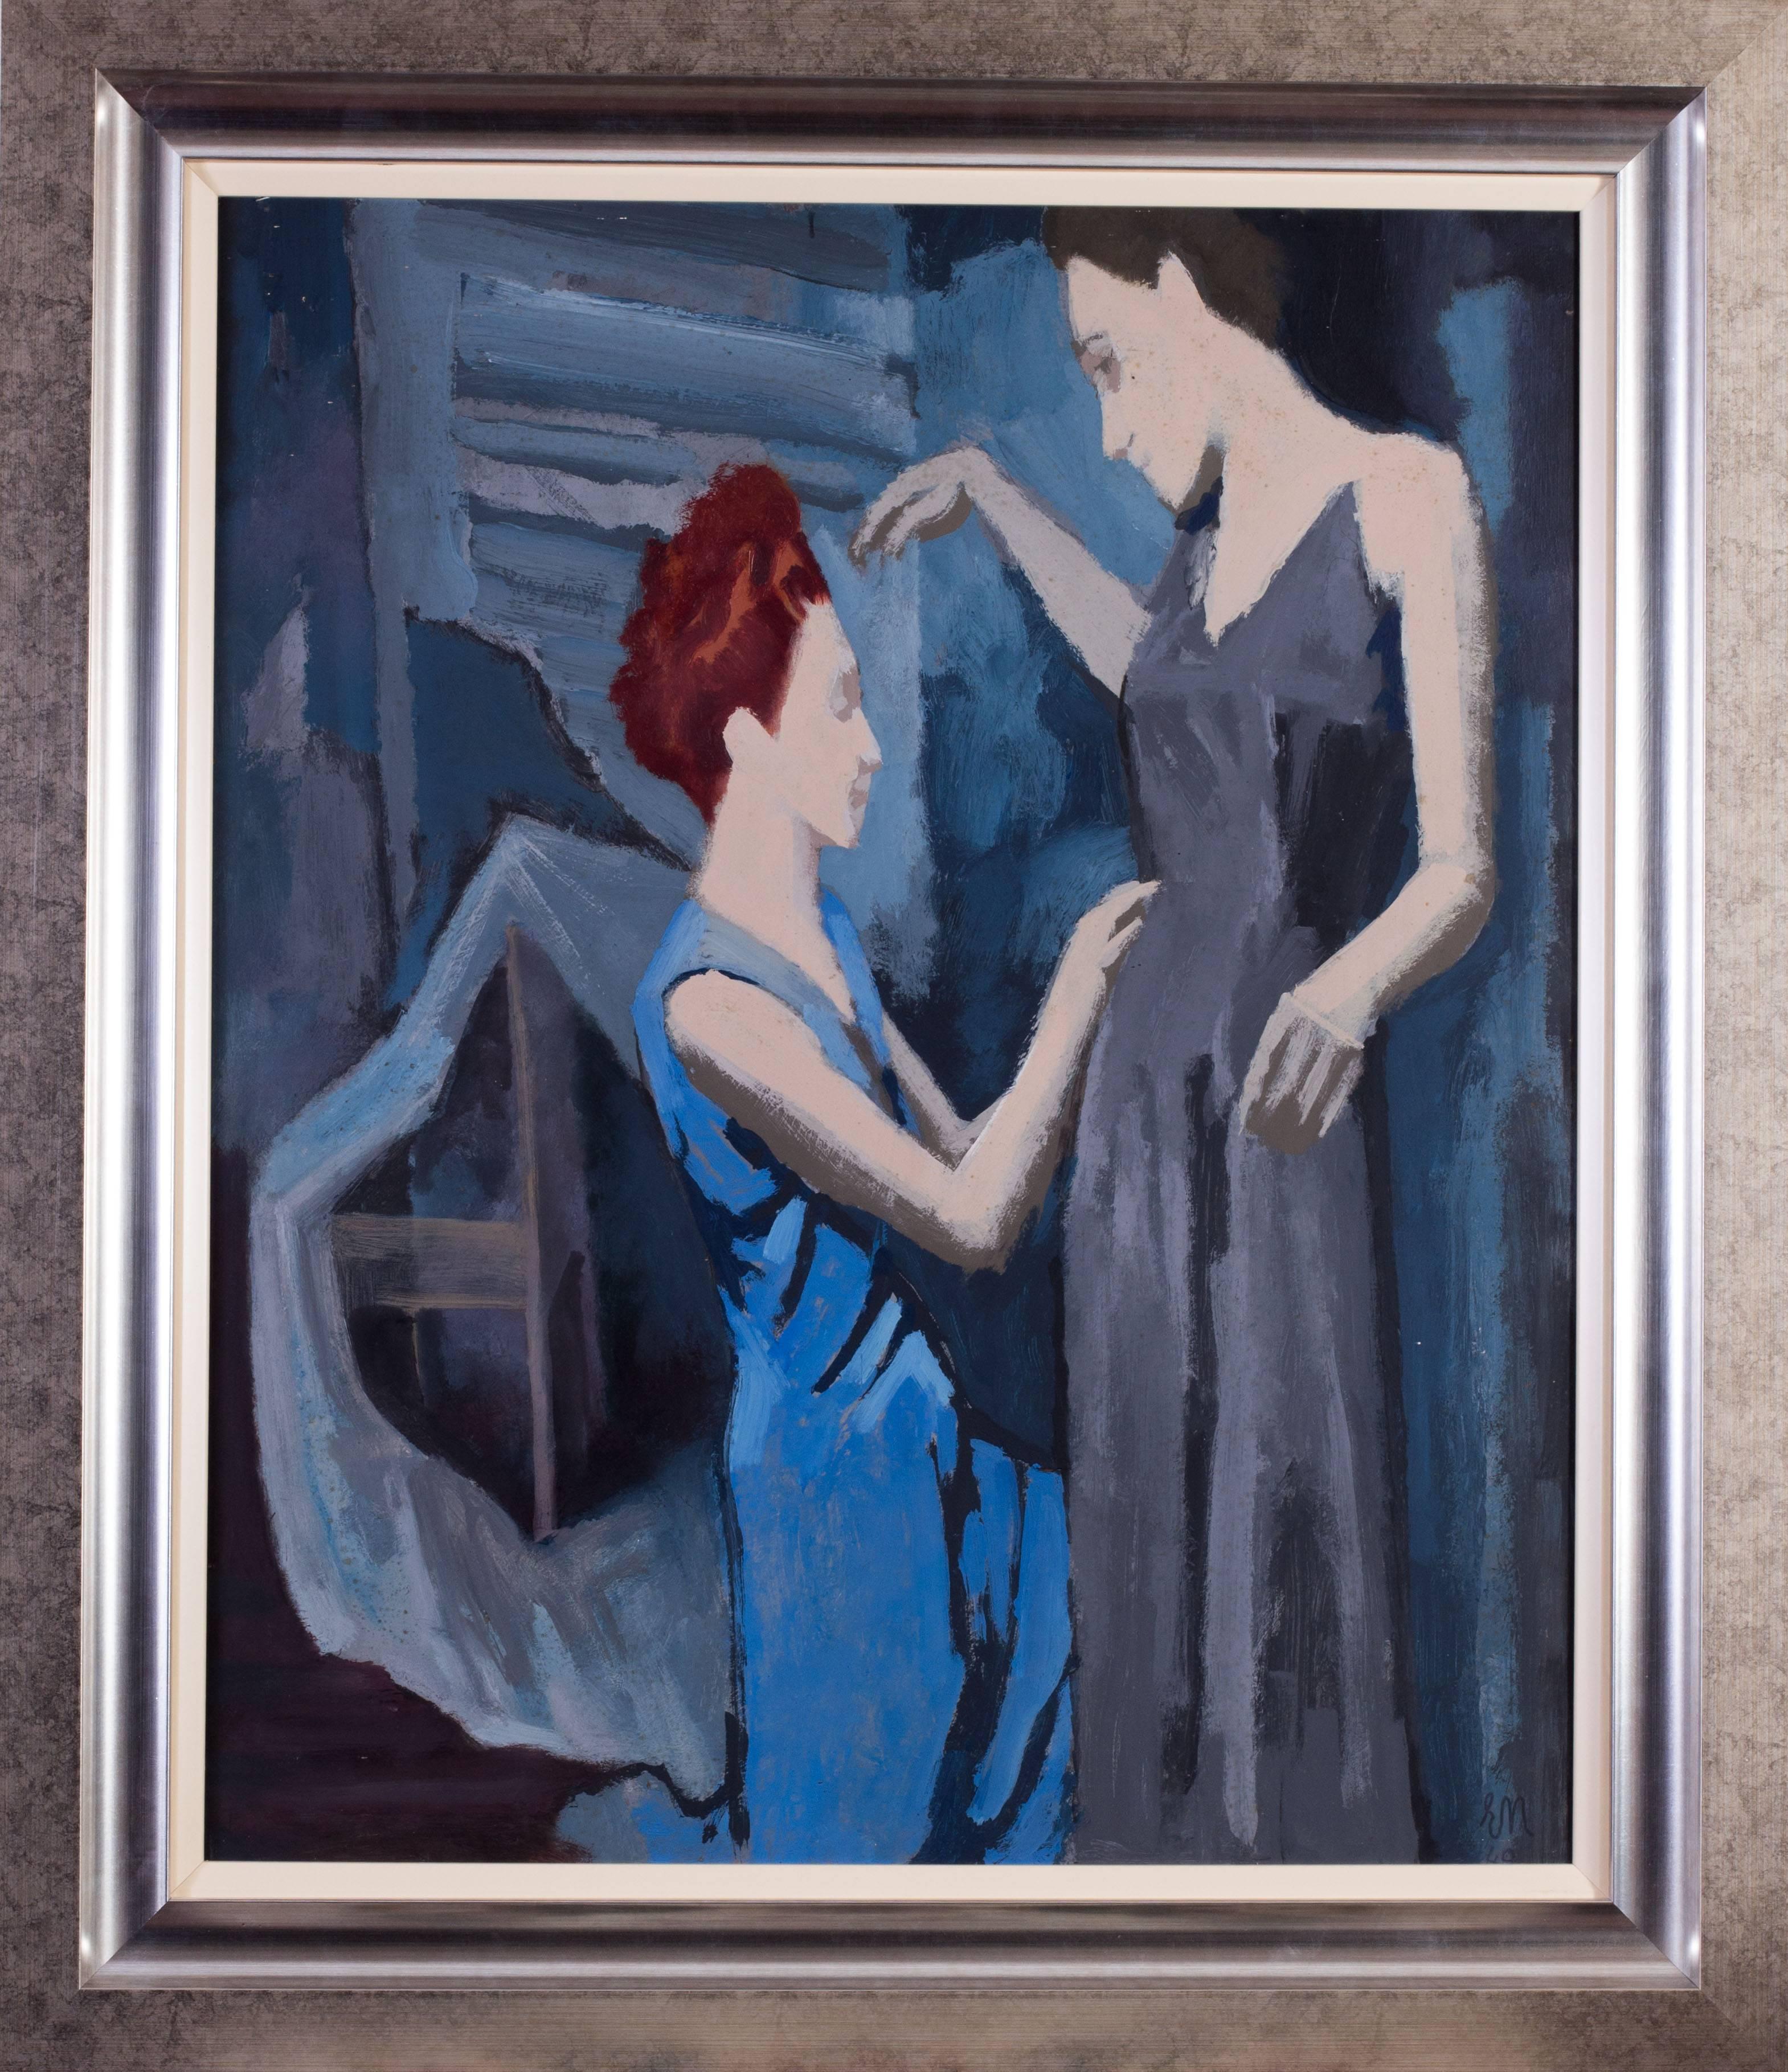 Ernst Neuschul Figurative Painting - Early 20th Century Czech Expressionist oil painting by Ernest Neuschul, blue